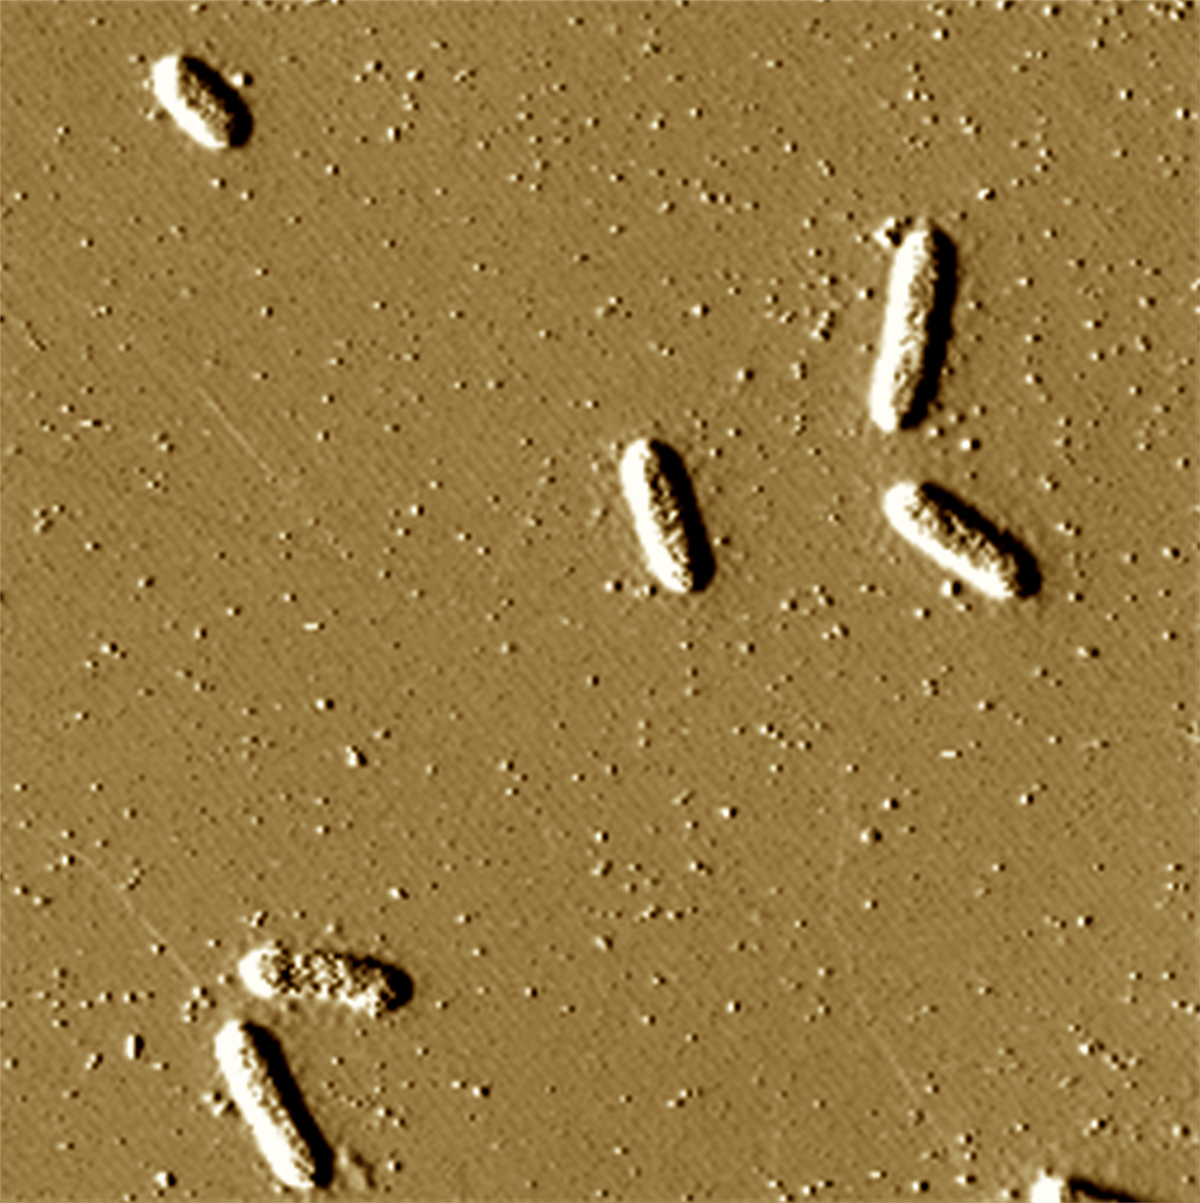 A micrograph shows rod-like Geobacter bacteria and the vesicles they release, seen as little dots throughout the image, which contain uranium the bacteria pull from their environment.